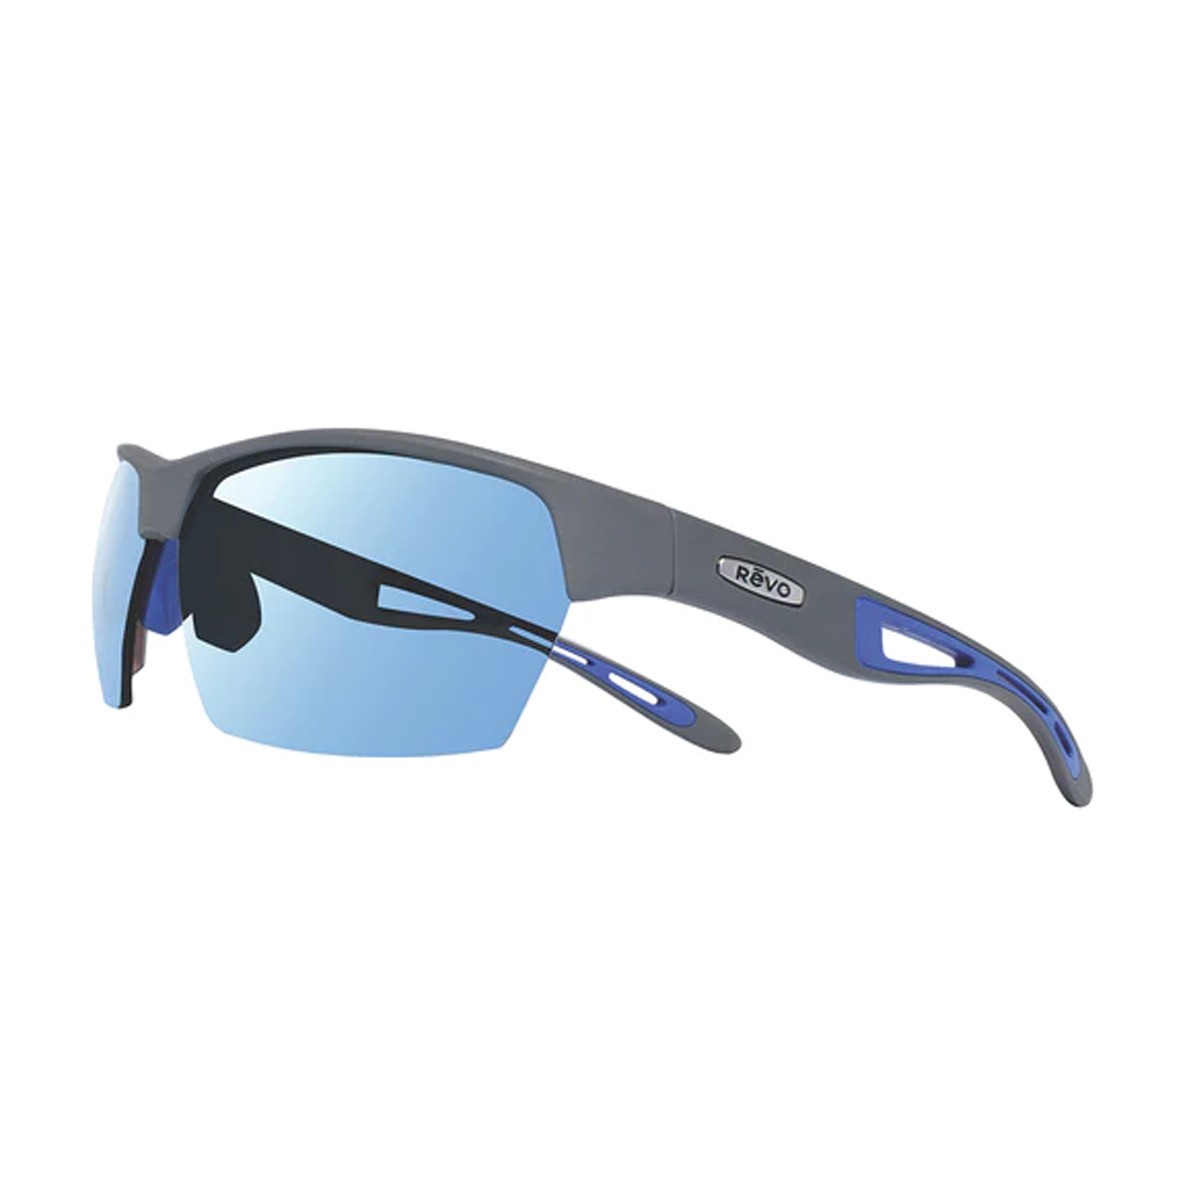 Details more than 159 are revo sunglasses good latest